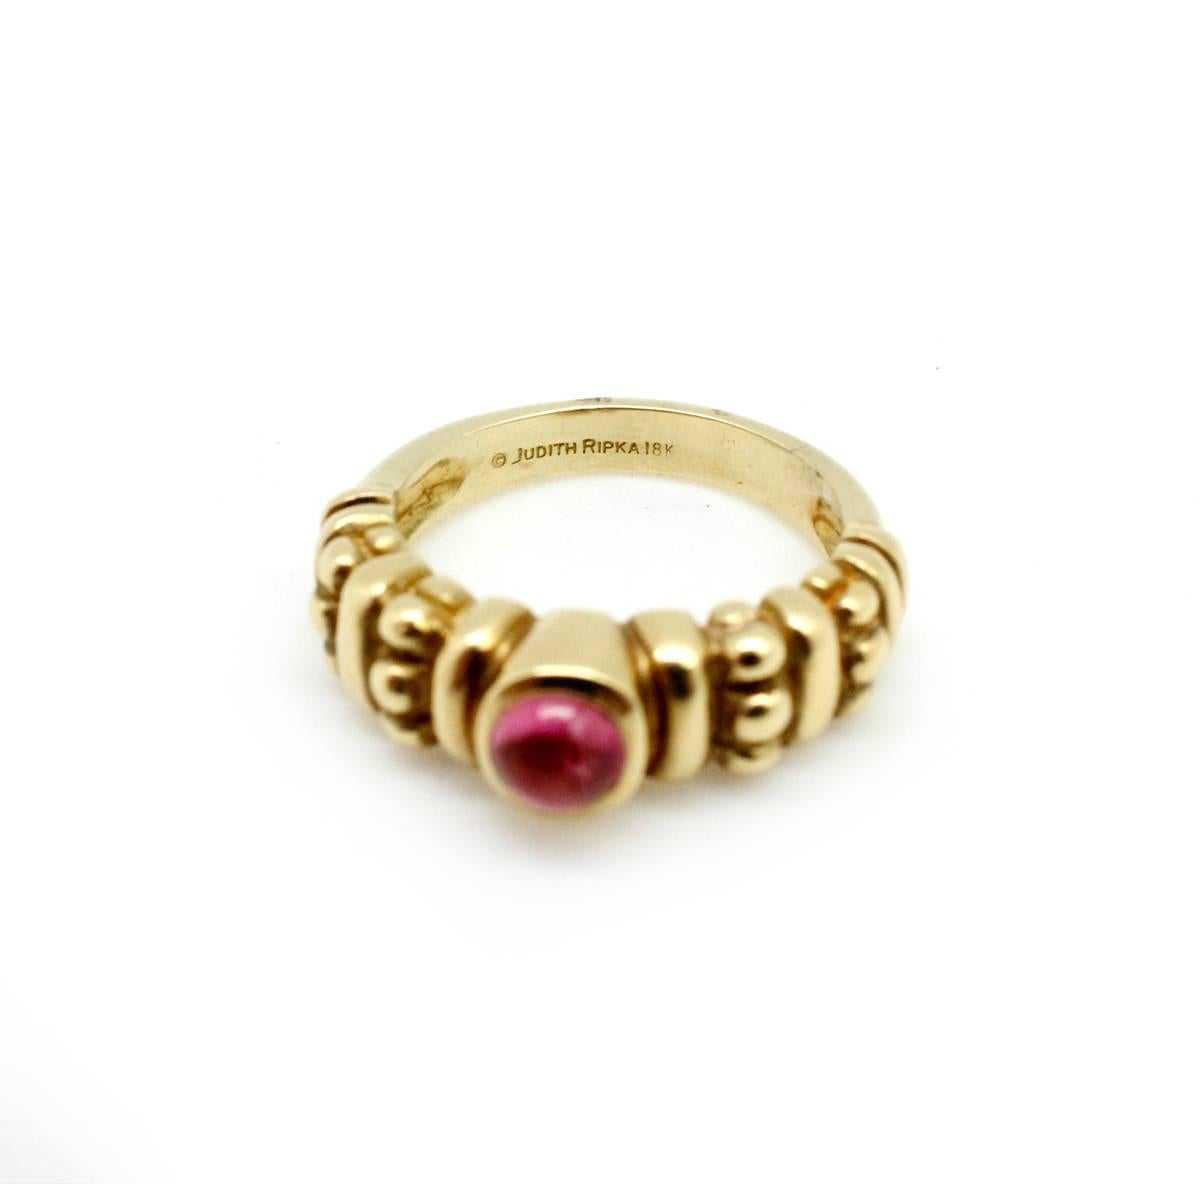 This ring is made in 18k yellow gold by Judith Ripka. The ring holds a single pink tourmaline cabochon at its center for vibrant color. The piece measures 7mm wide, and it weighs 9.1 grams. The ring is a size 7, and it is signed 